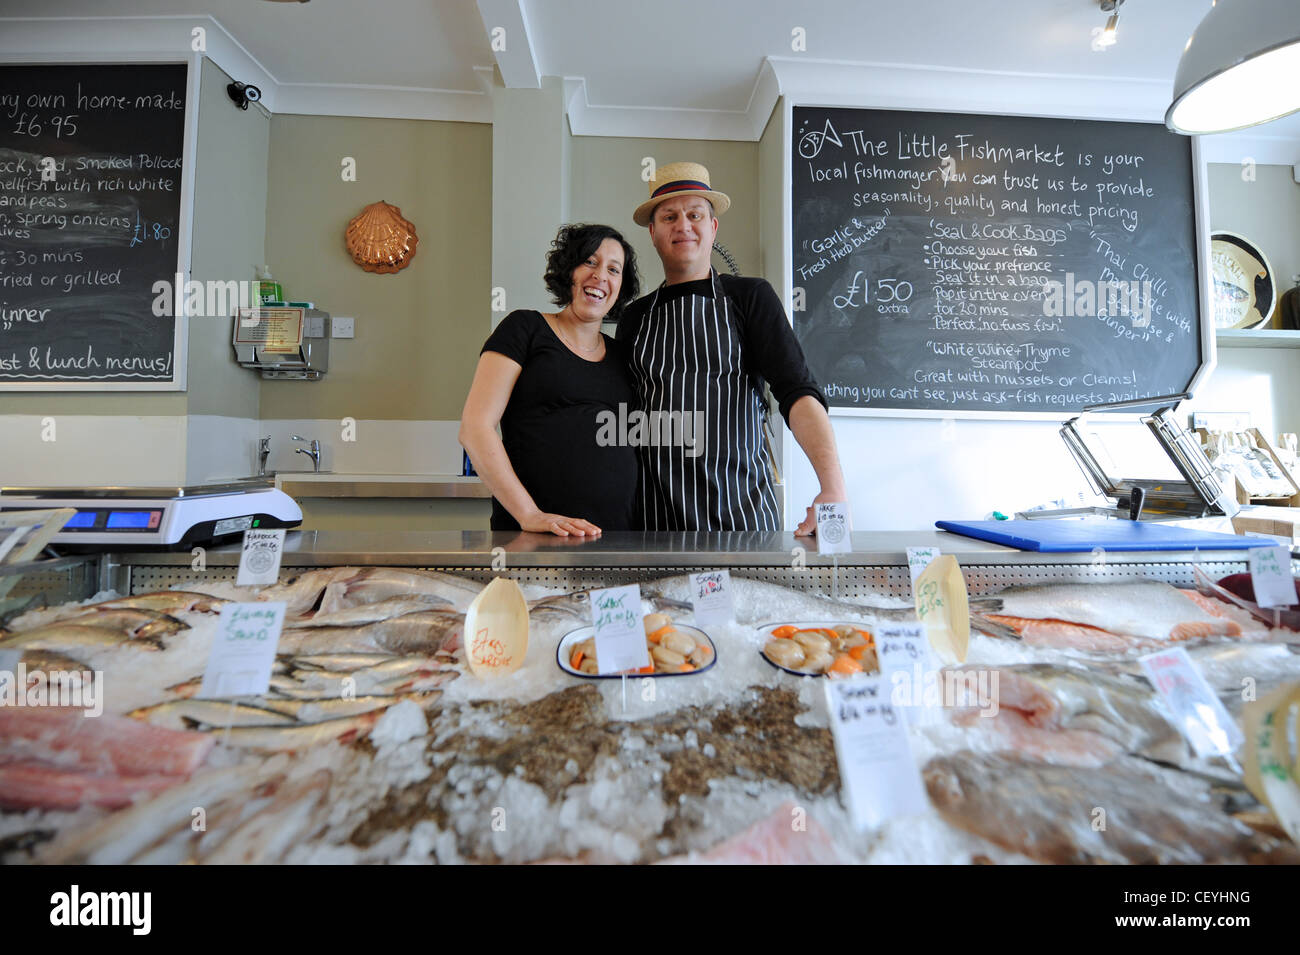 Owners of the Little Fishmarket fishmongers and deli cafe in Brighton UK with display of fresh local fish Stock Photo